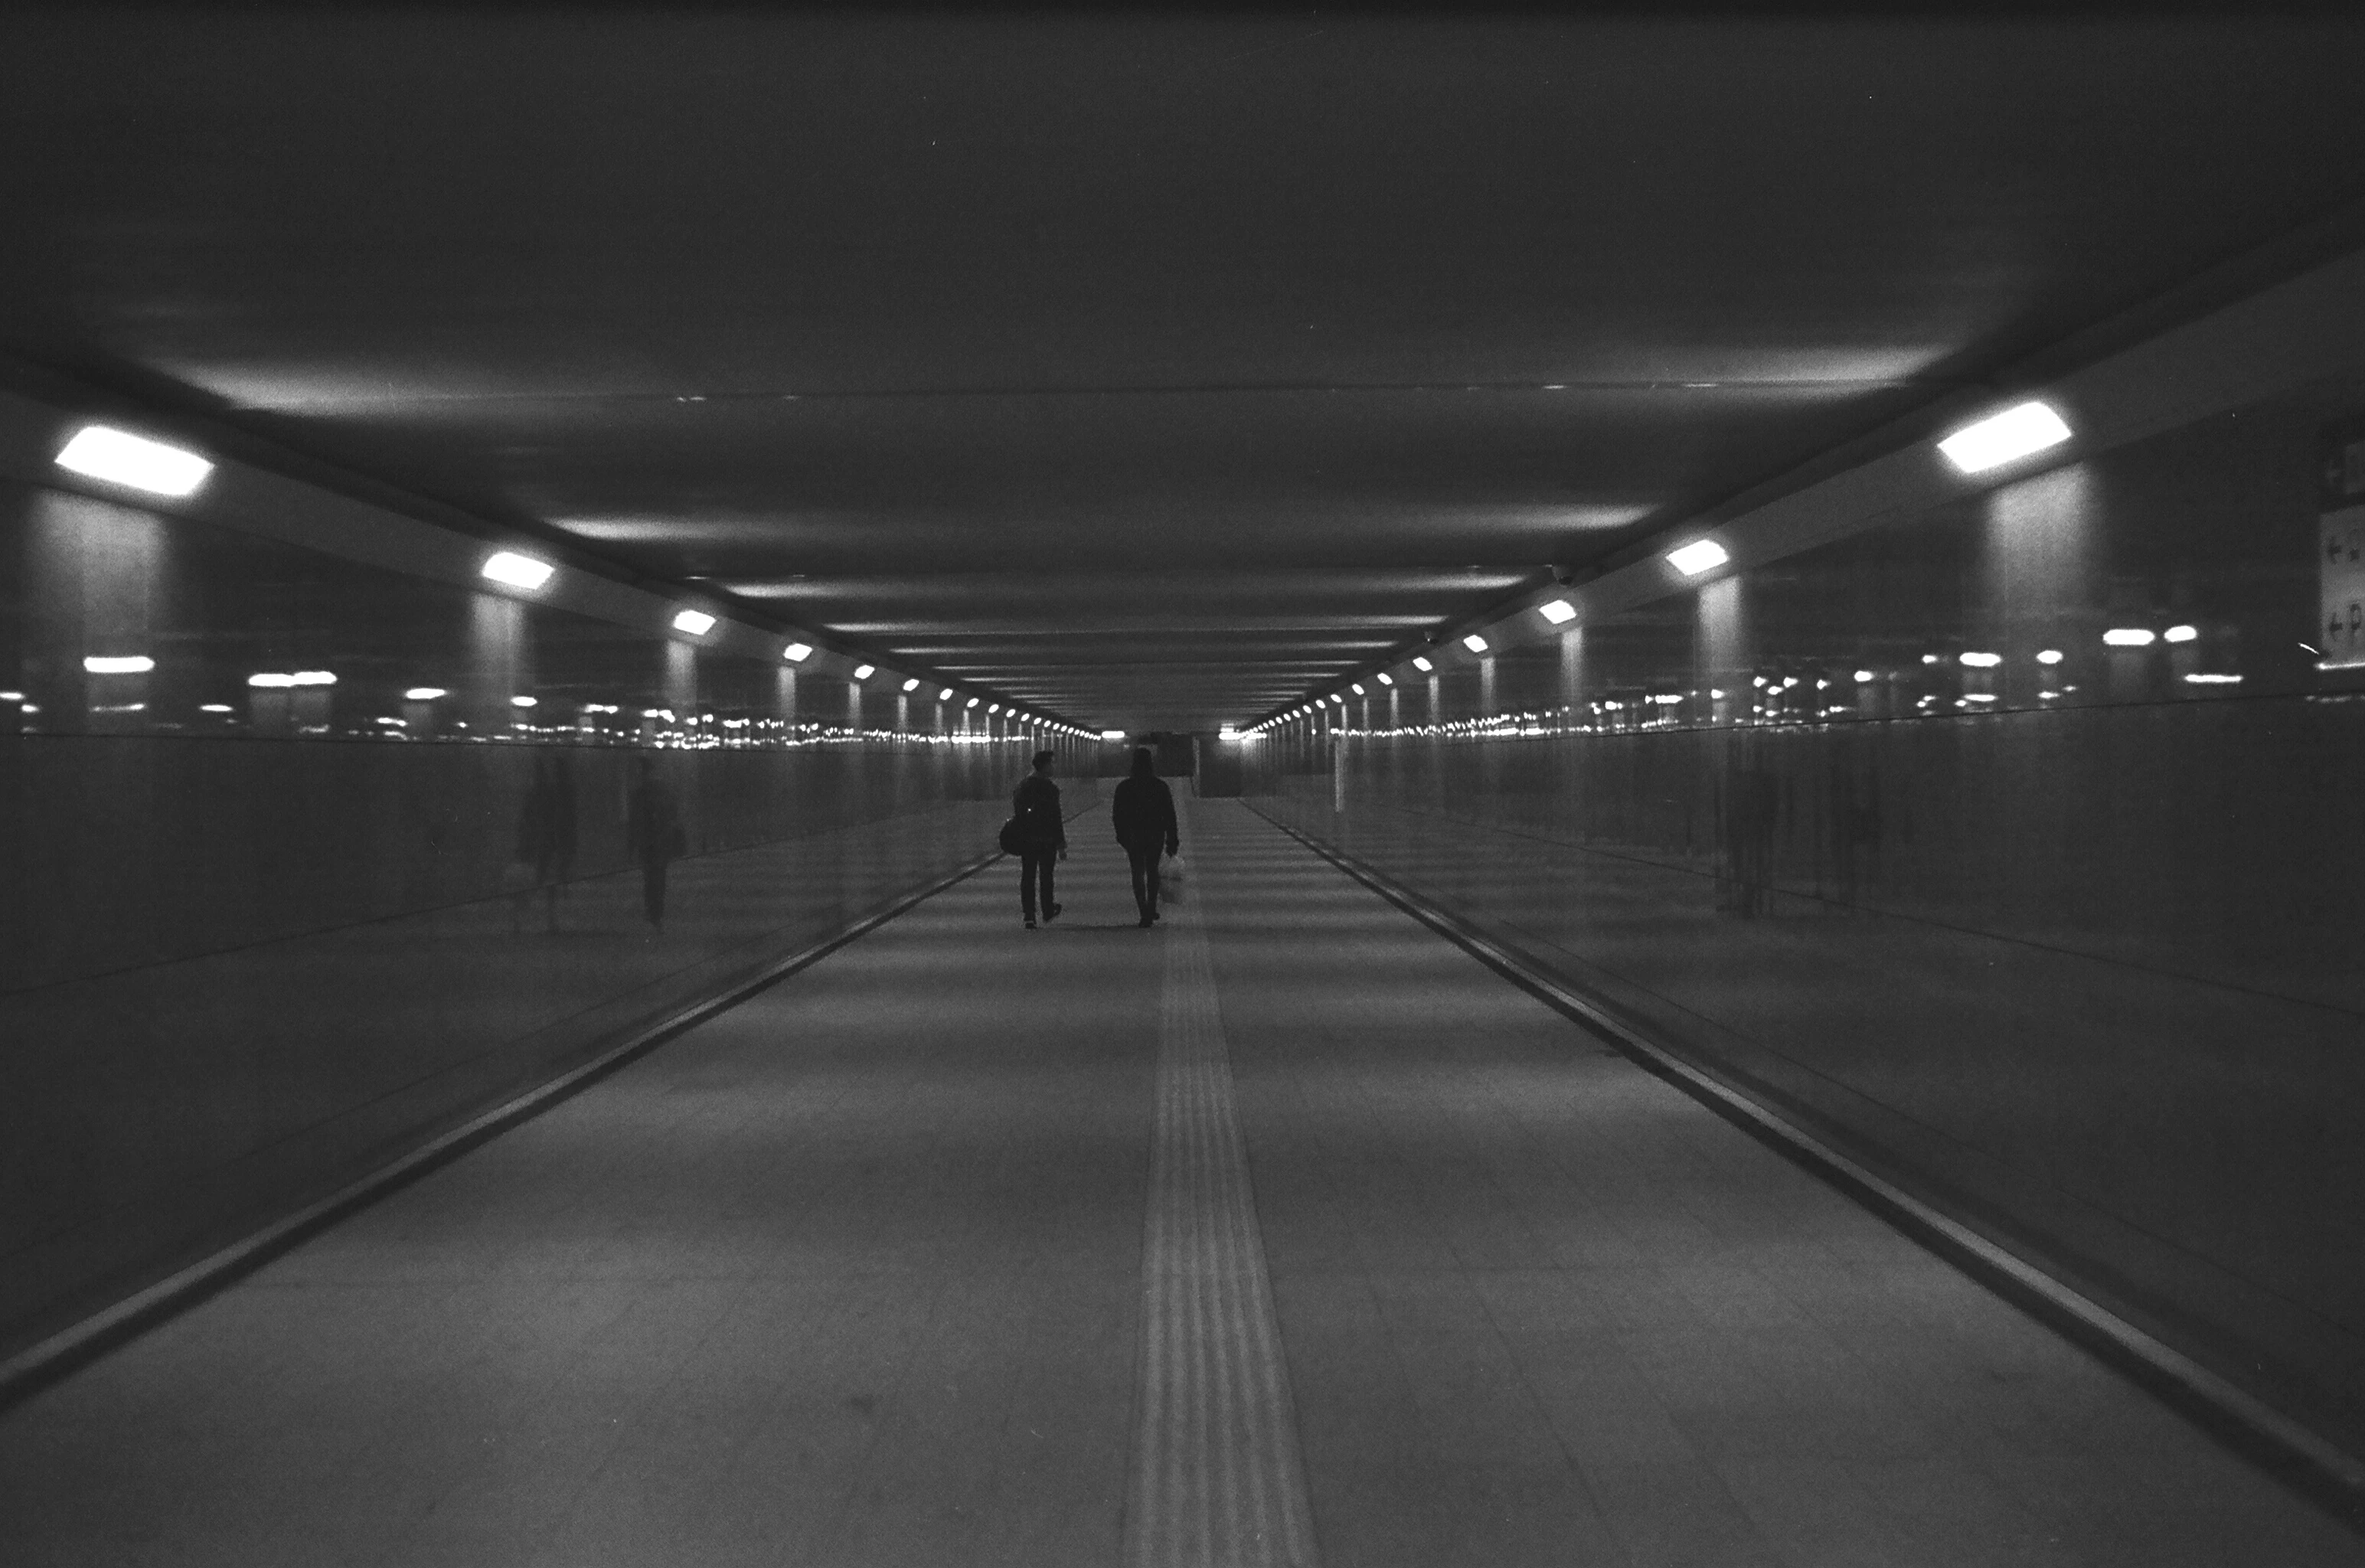 Two people walking in a tunnel